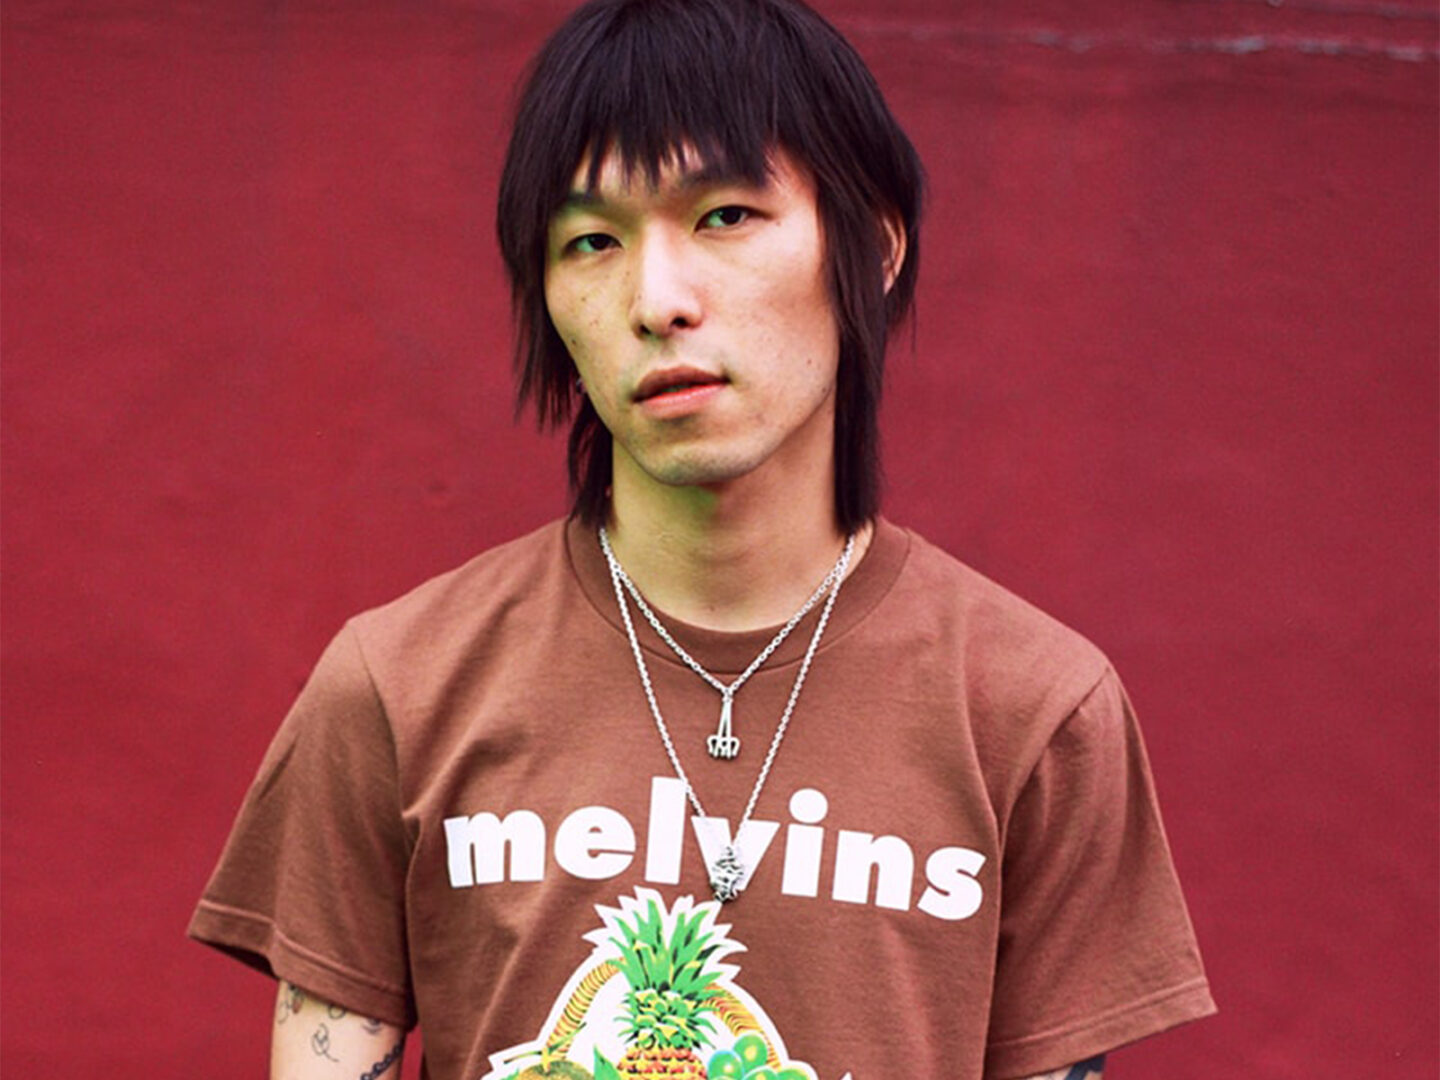 Supreme pays tribute to Melvins - HIGHXTAR.